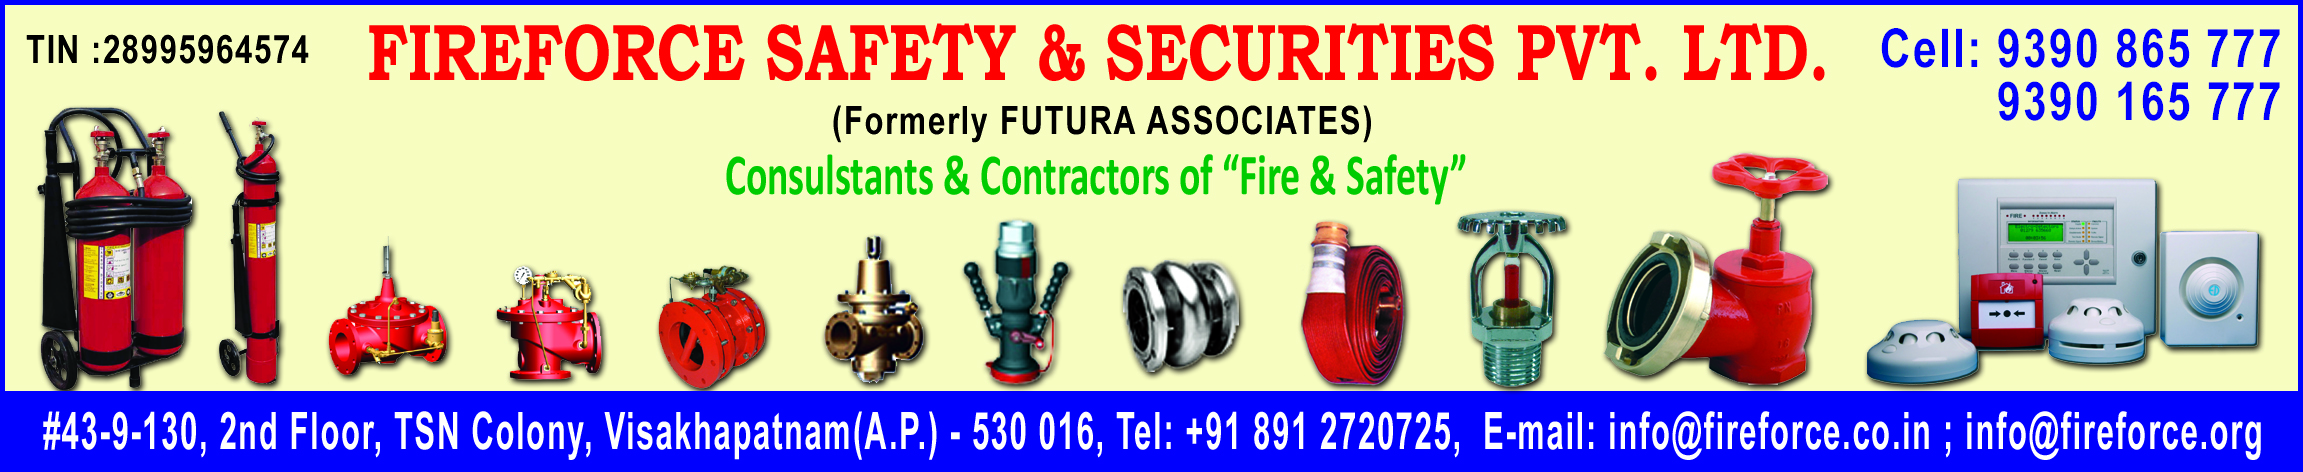 FIREFORCE SAFETY & SECURITIES PVT.LTD.